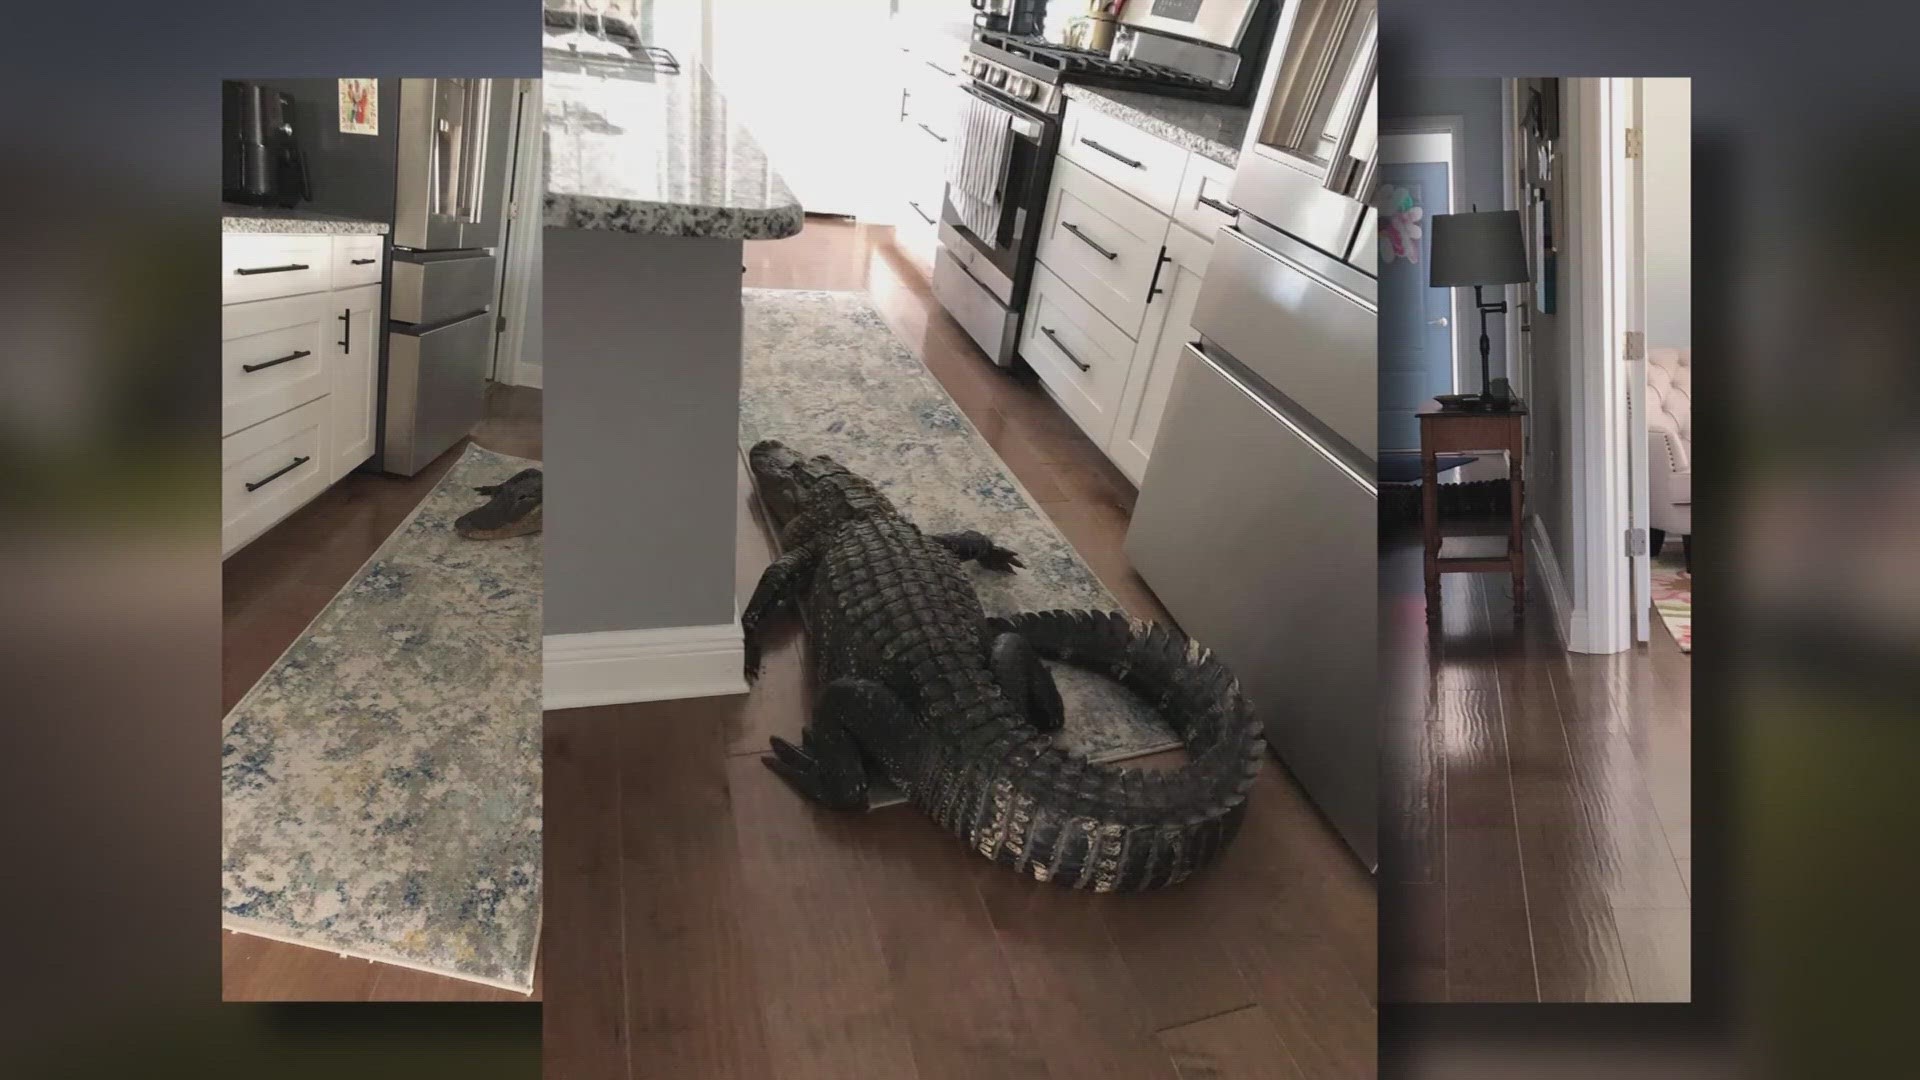 "My house was in his way so I can't be upset at an alligator for that," the homeowner said.